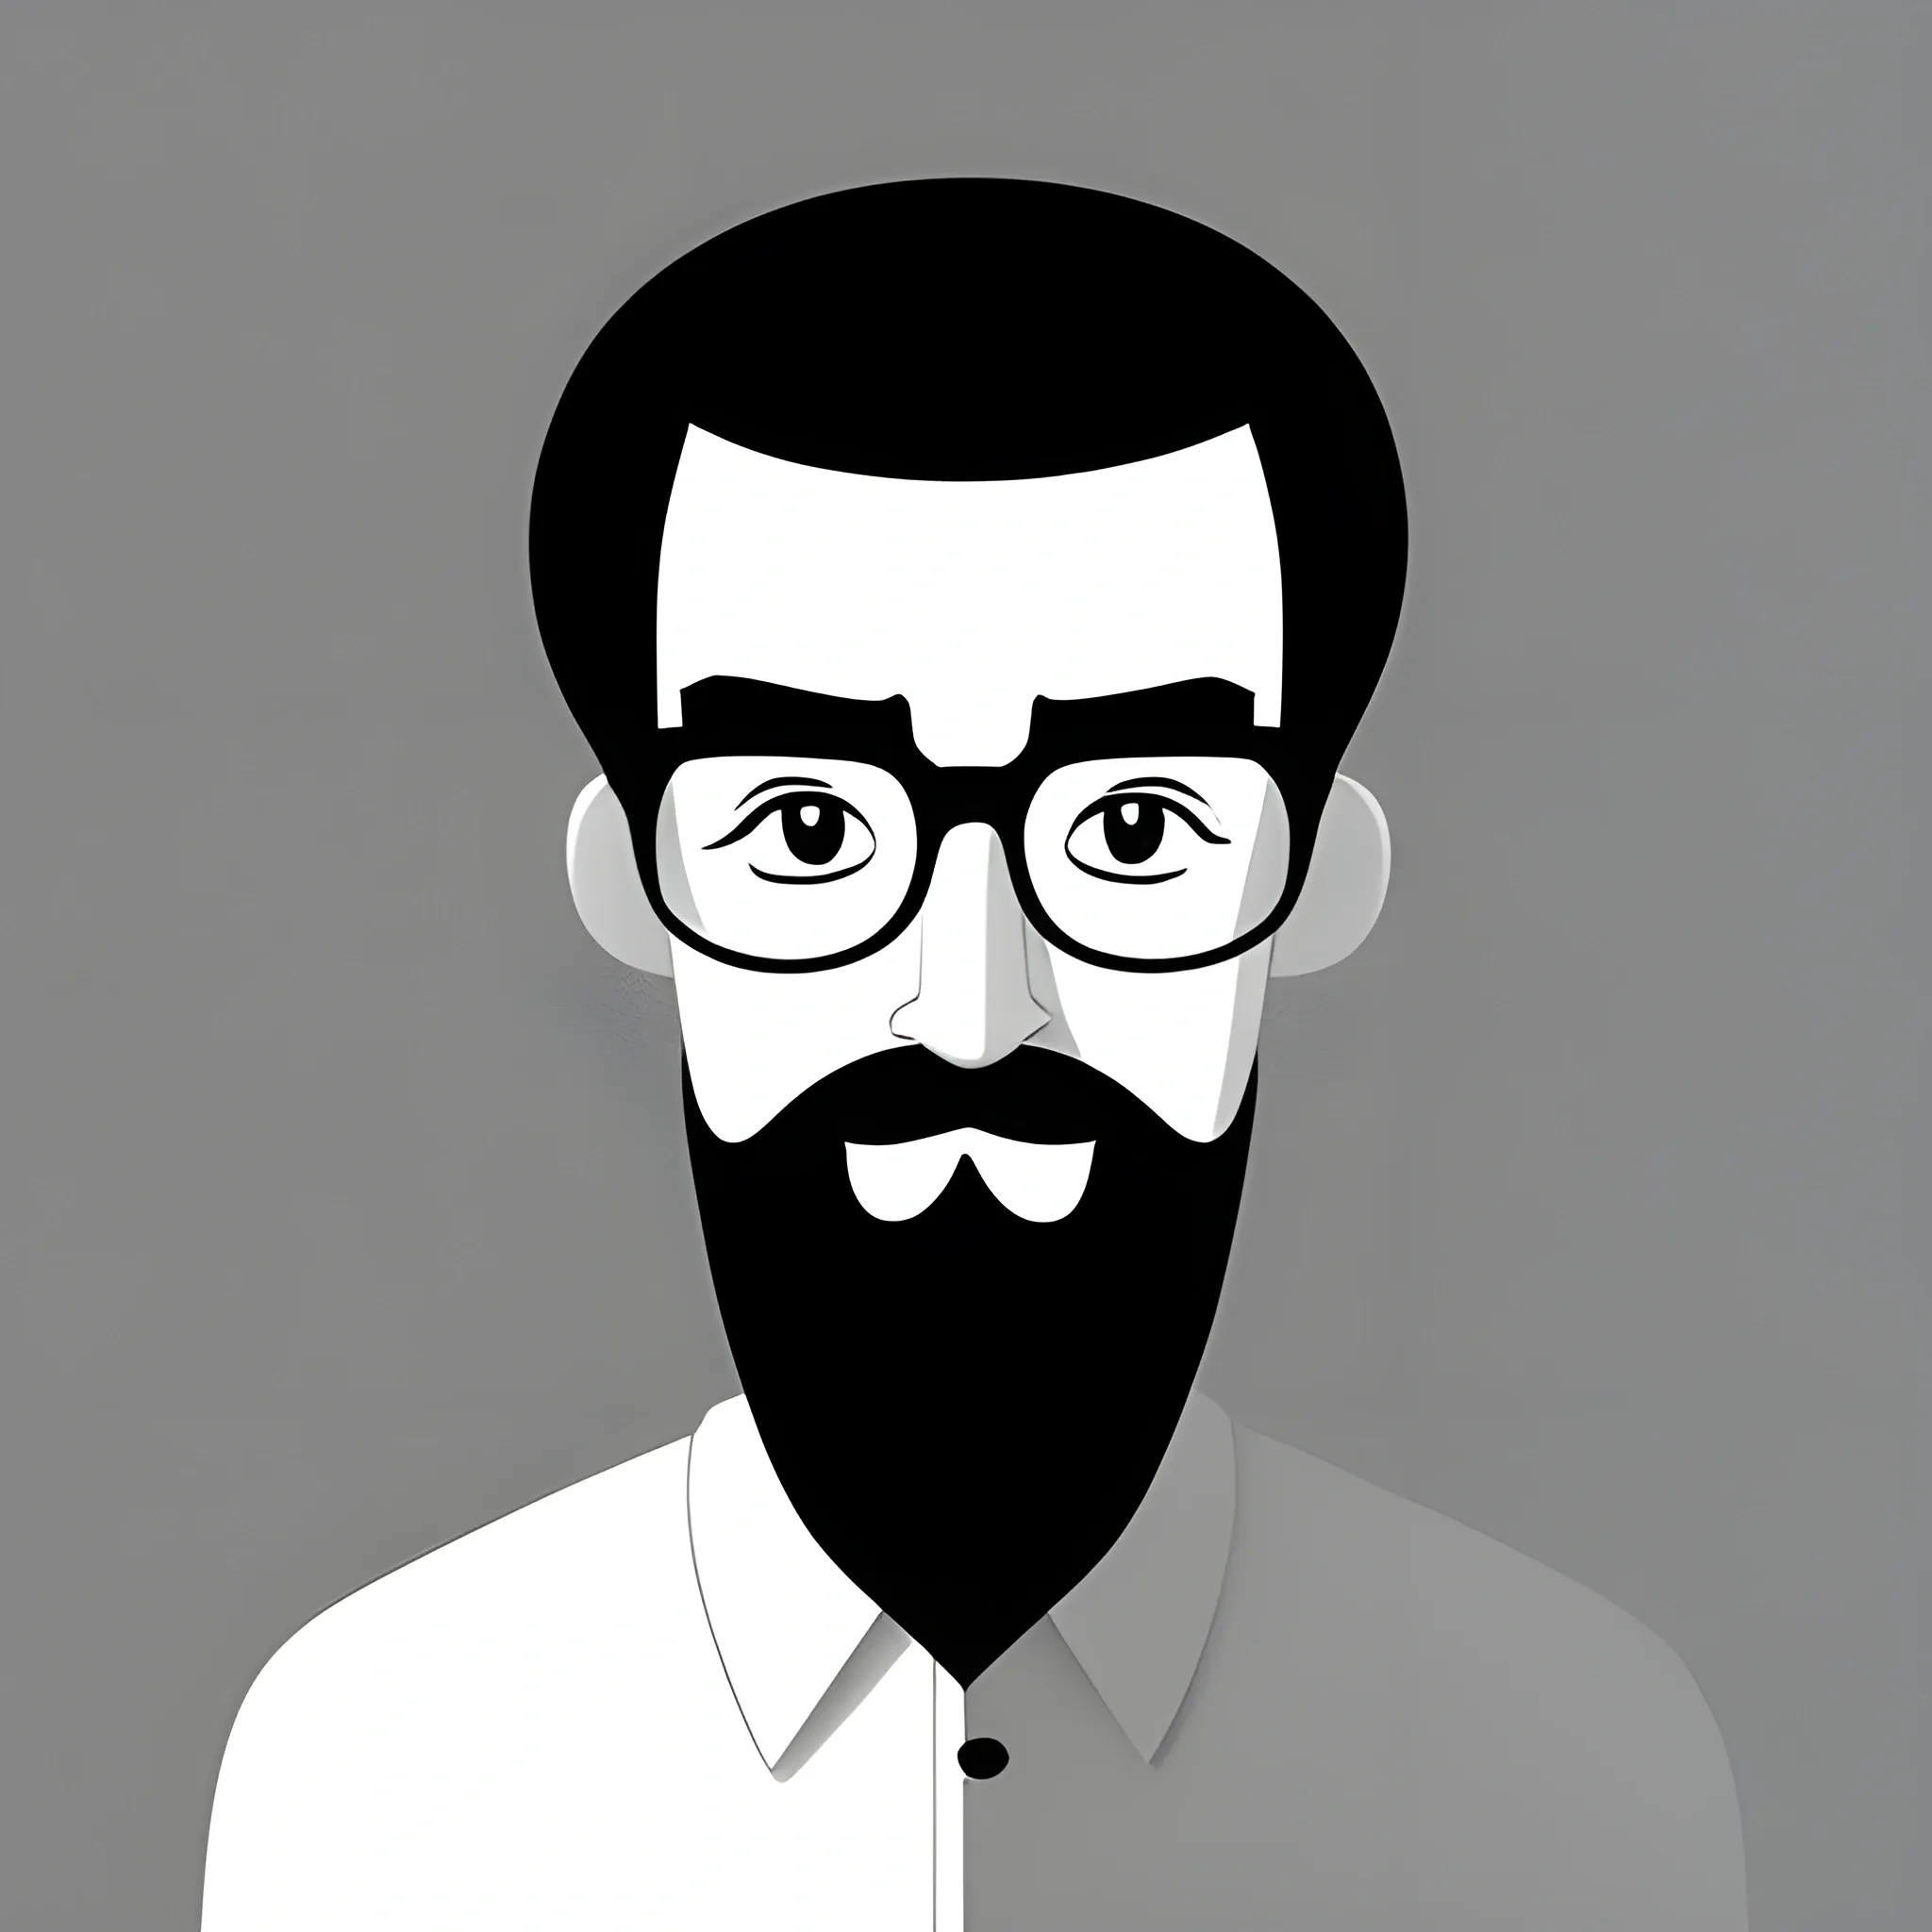 man with glasses without beard by Cartoon，Minimalism
